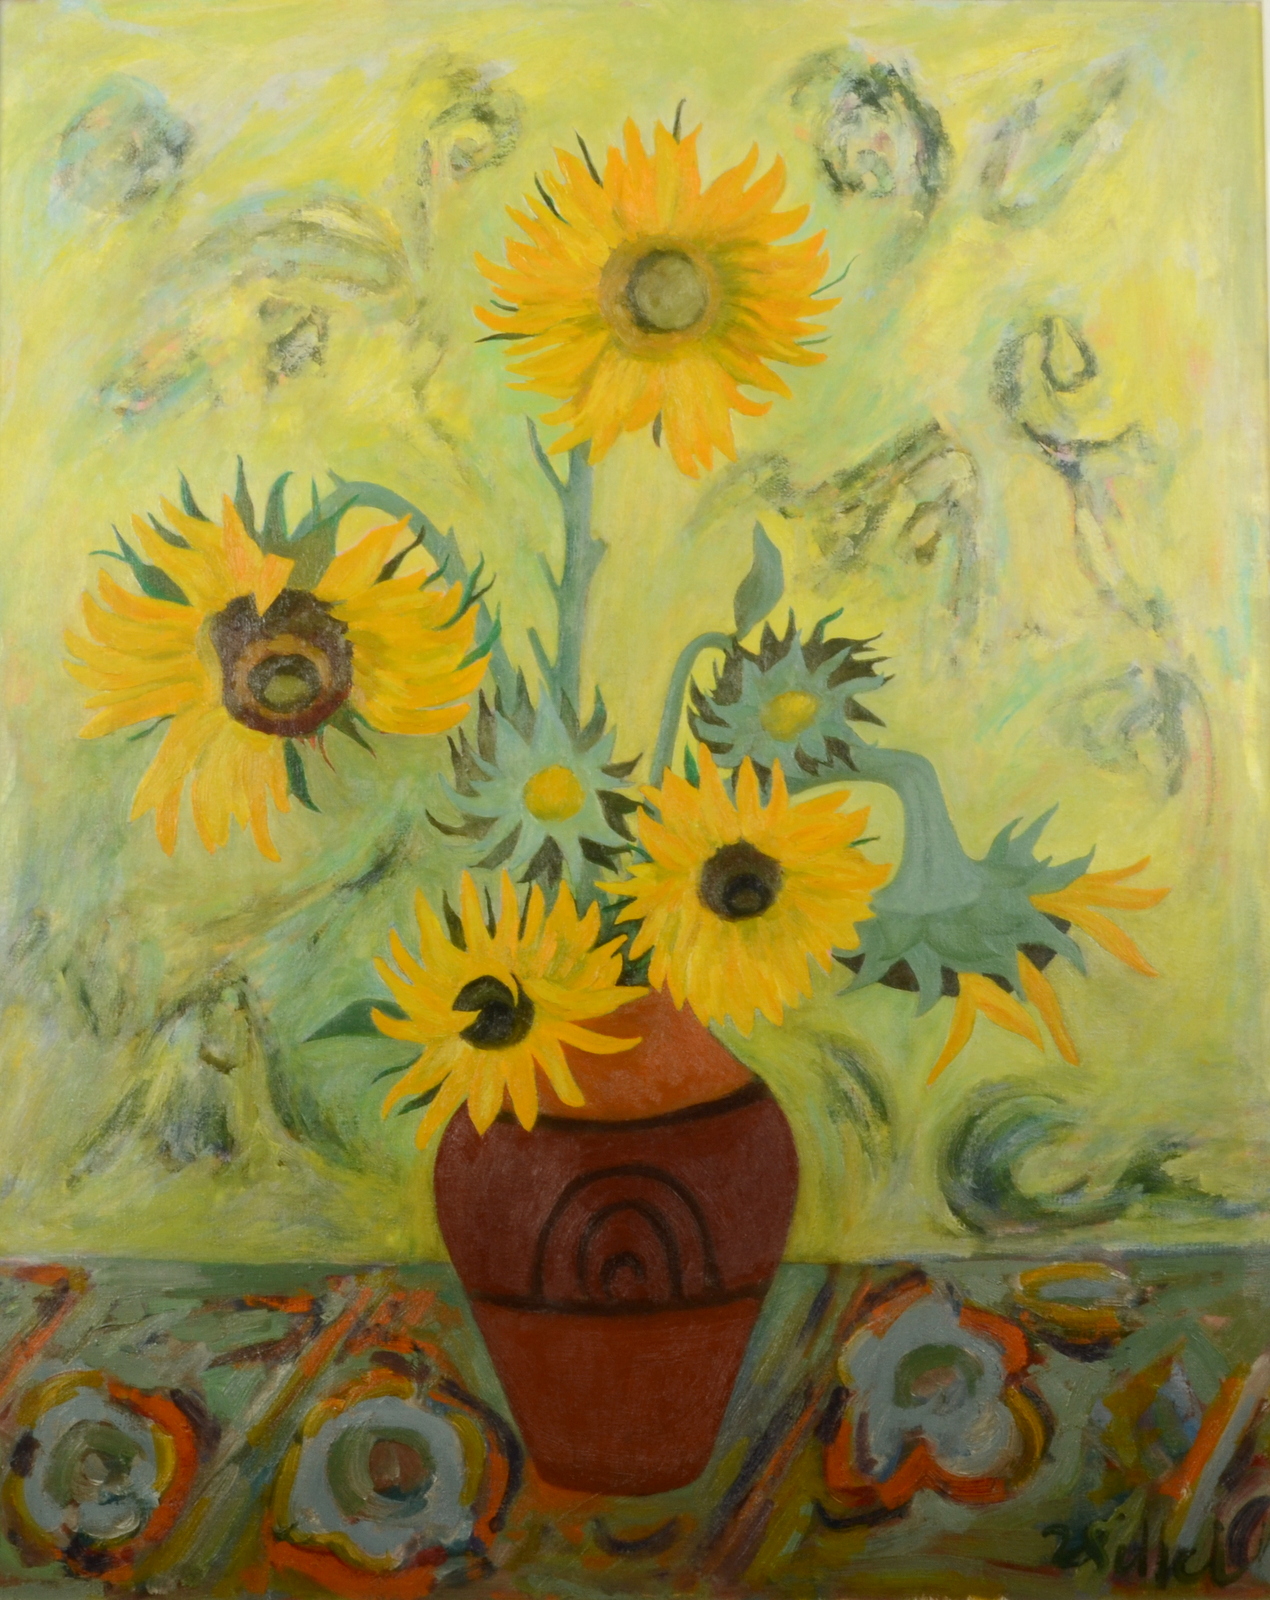 JOAN GILLCHREST Sunflowers in a Leach Pot Oil on board Signed Inscribed to the back 75 x